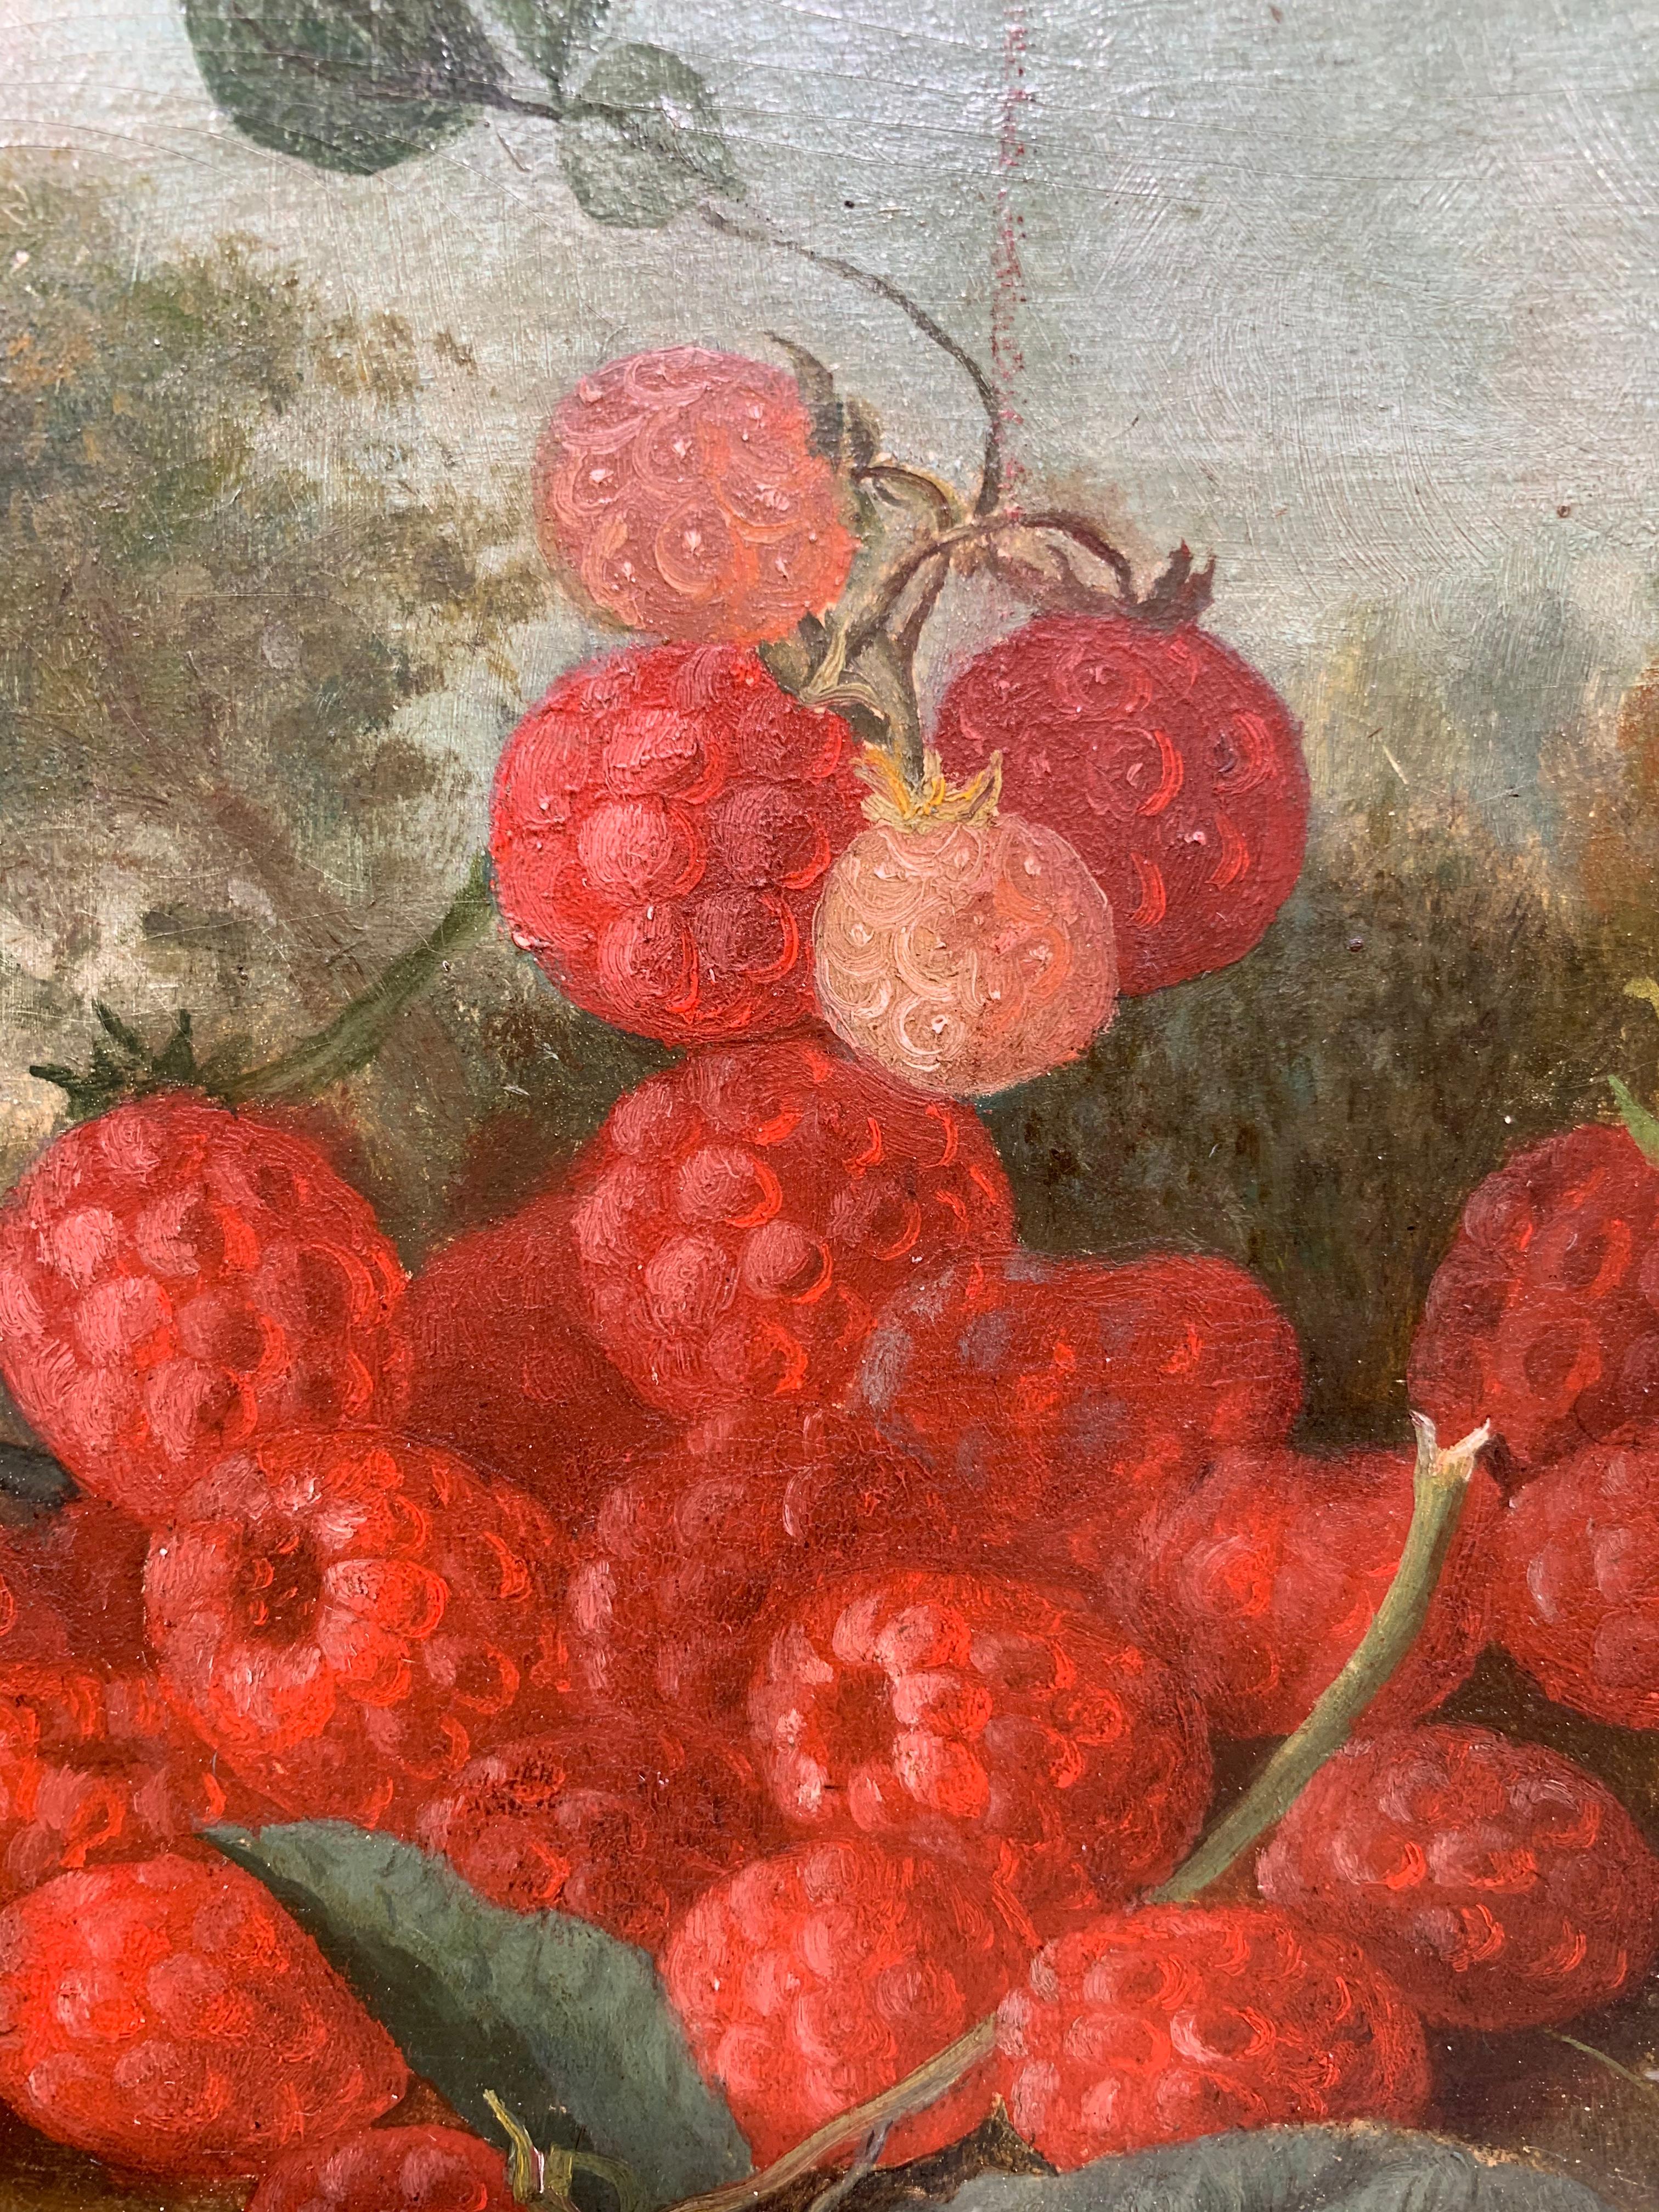 Stunning pair of antique Hudson River School era still life paintings. Each depicts an arrangement of fresh berries in a natural, atmospheric landscape, making them outstanding examples of distinctly American Romantic still life painting. Oil on